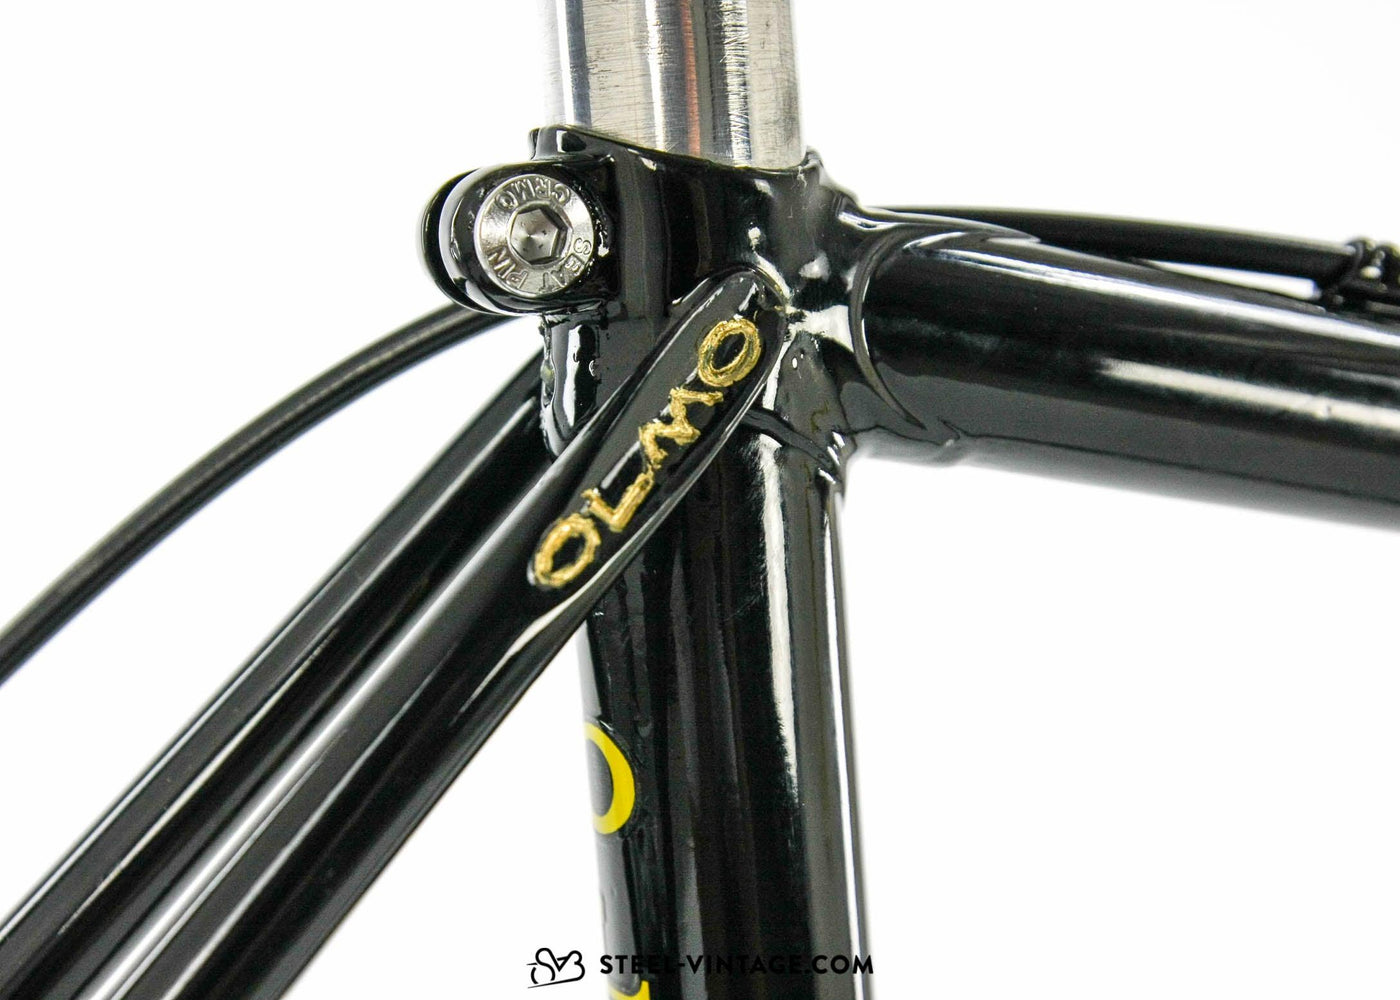 Olmo Competition Classic Road Bike - Steel Vintage Bikes